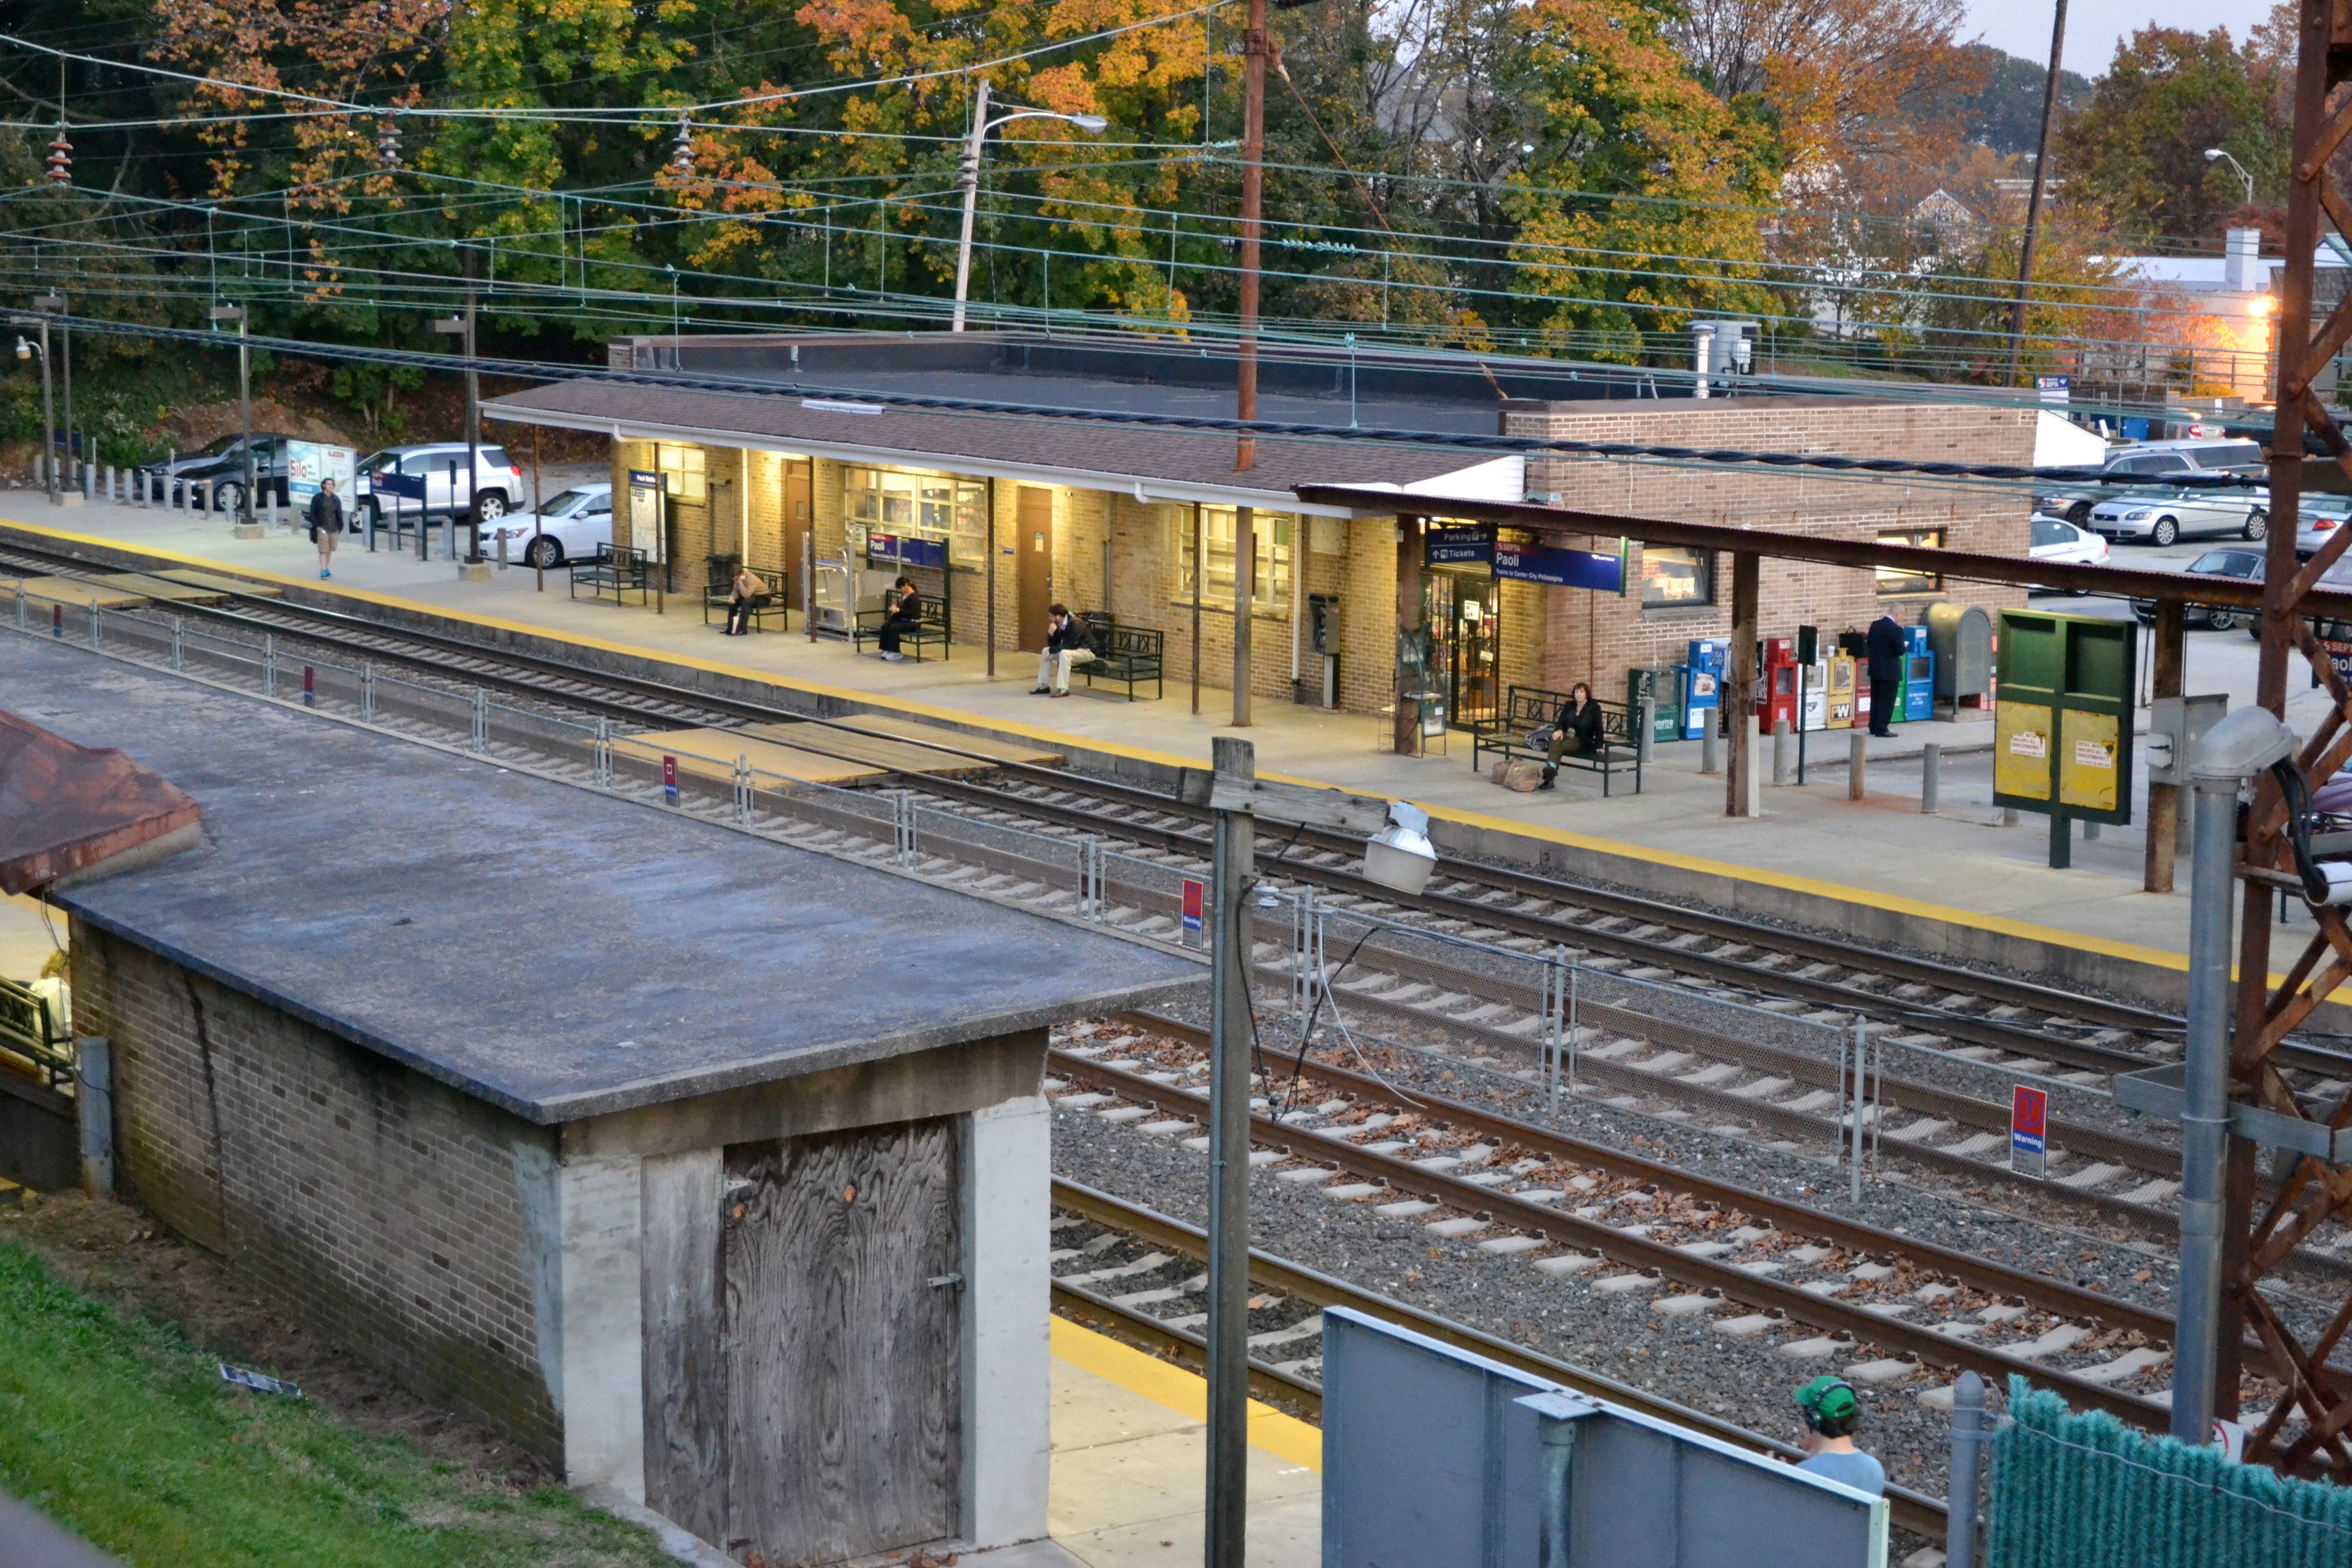 The current Paoli station is a small, outdated structure at the back of an inaccessible parking lot